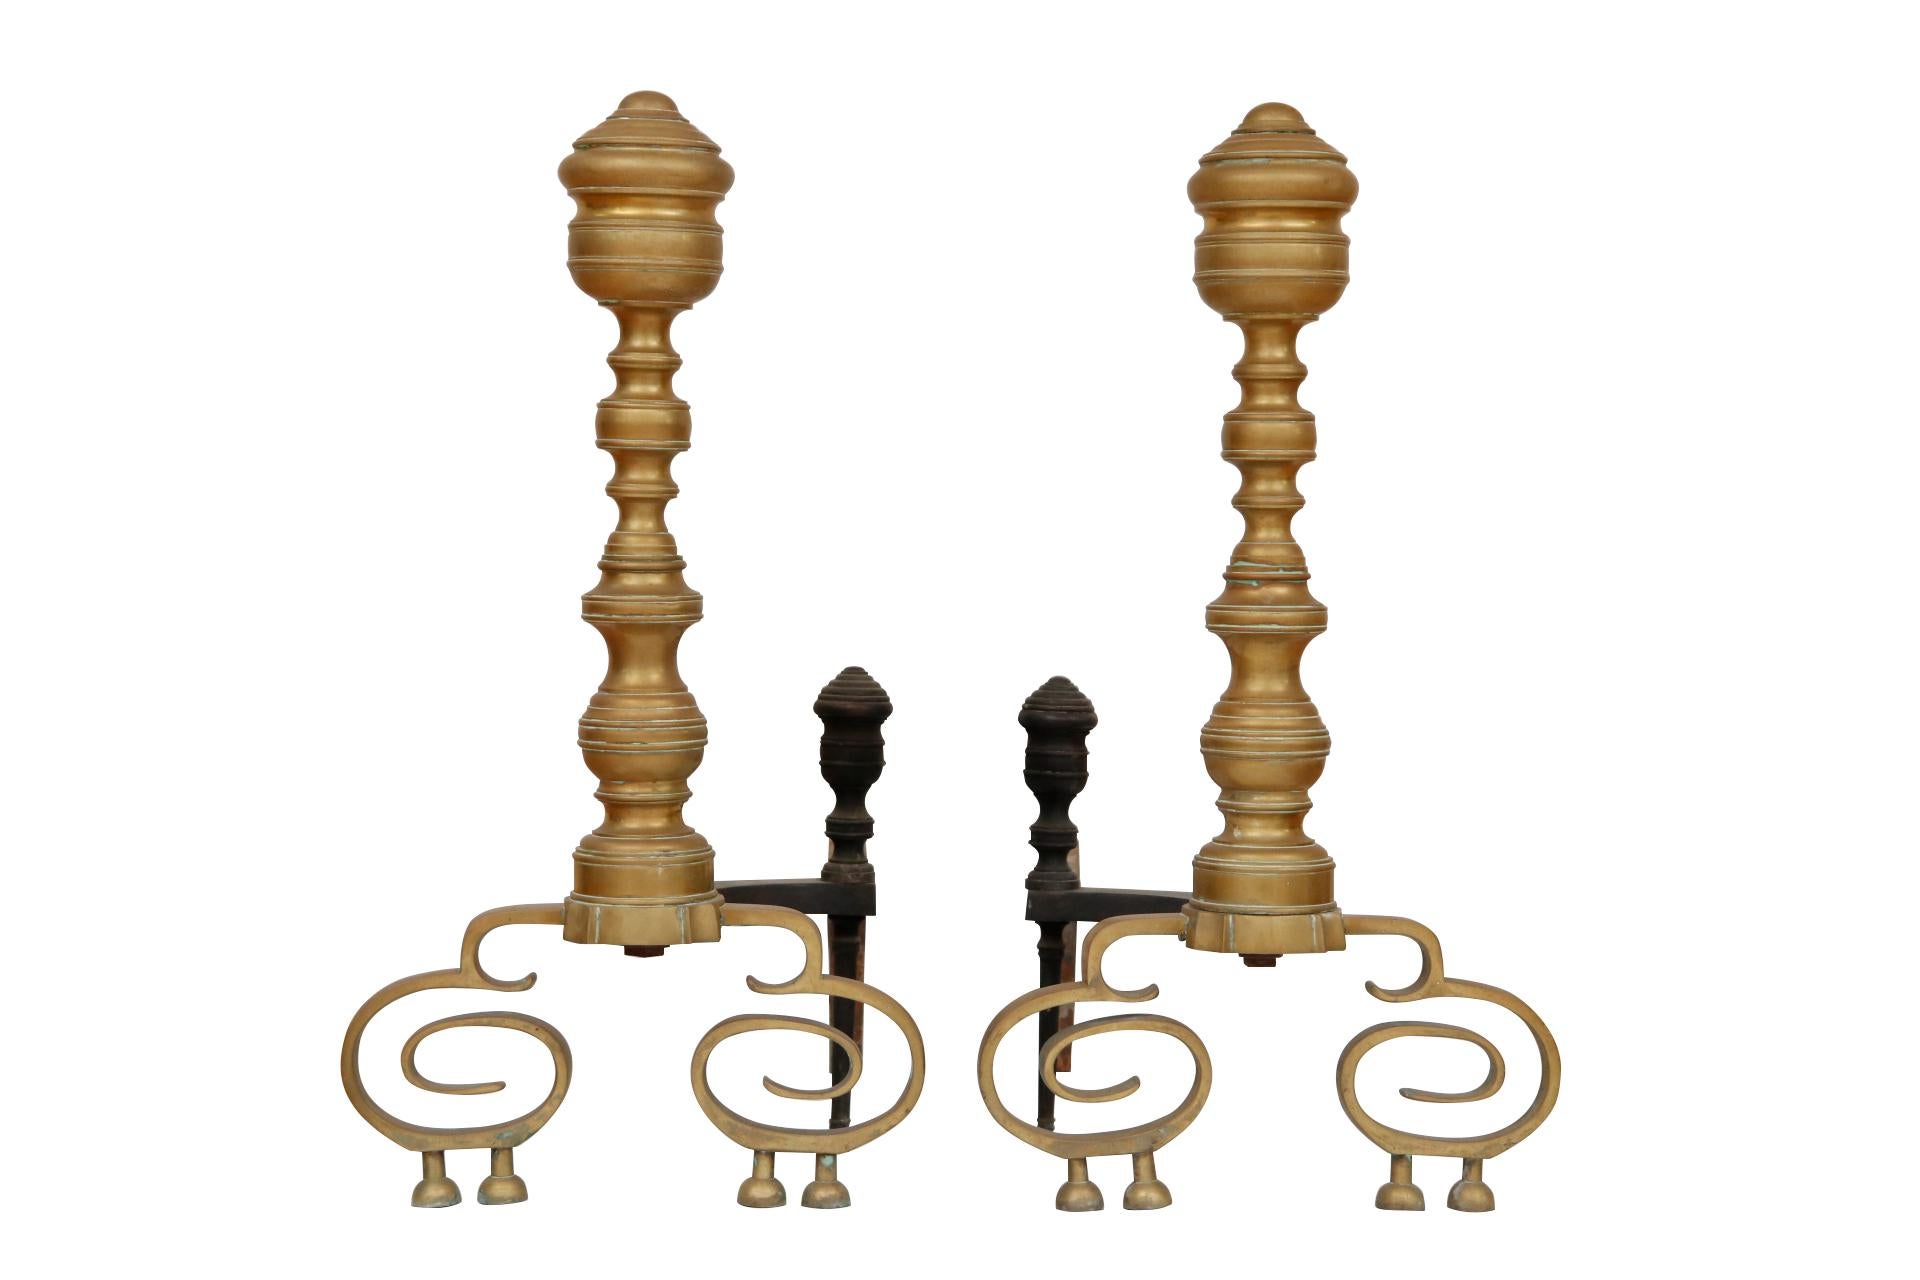 A pair of American Empire brass andirons circa 1830. Columns are cast to give the look of turned balusters with large urn finials. Matching log stops decorate wrought iron dog legs. The andirons stand on scrolled legs each finished with ball feet.